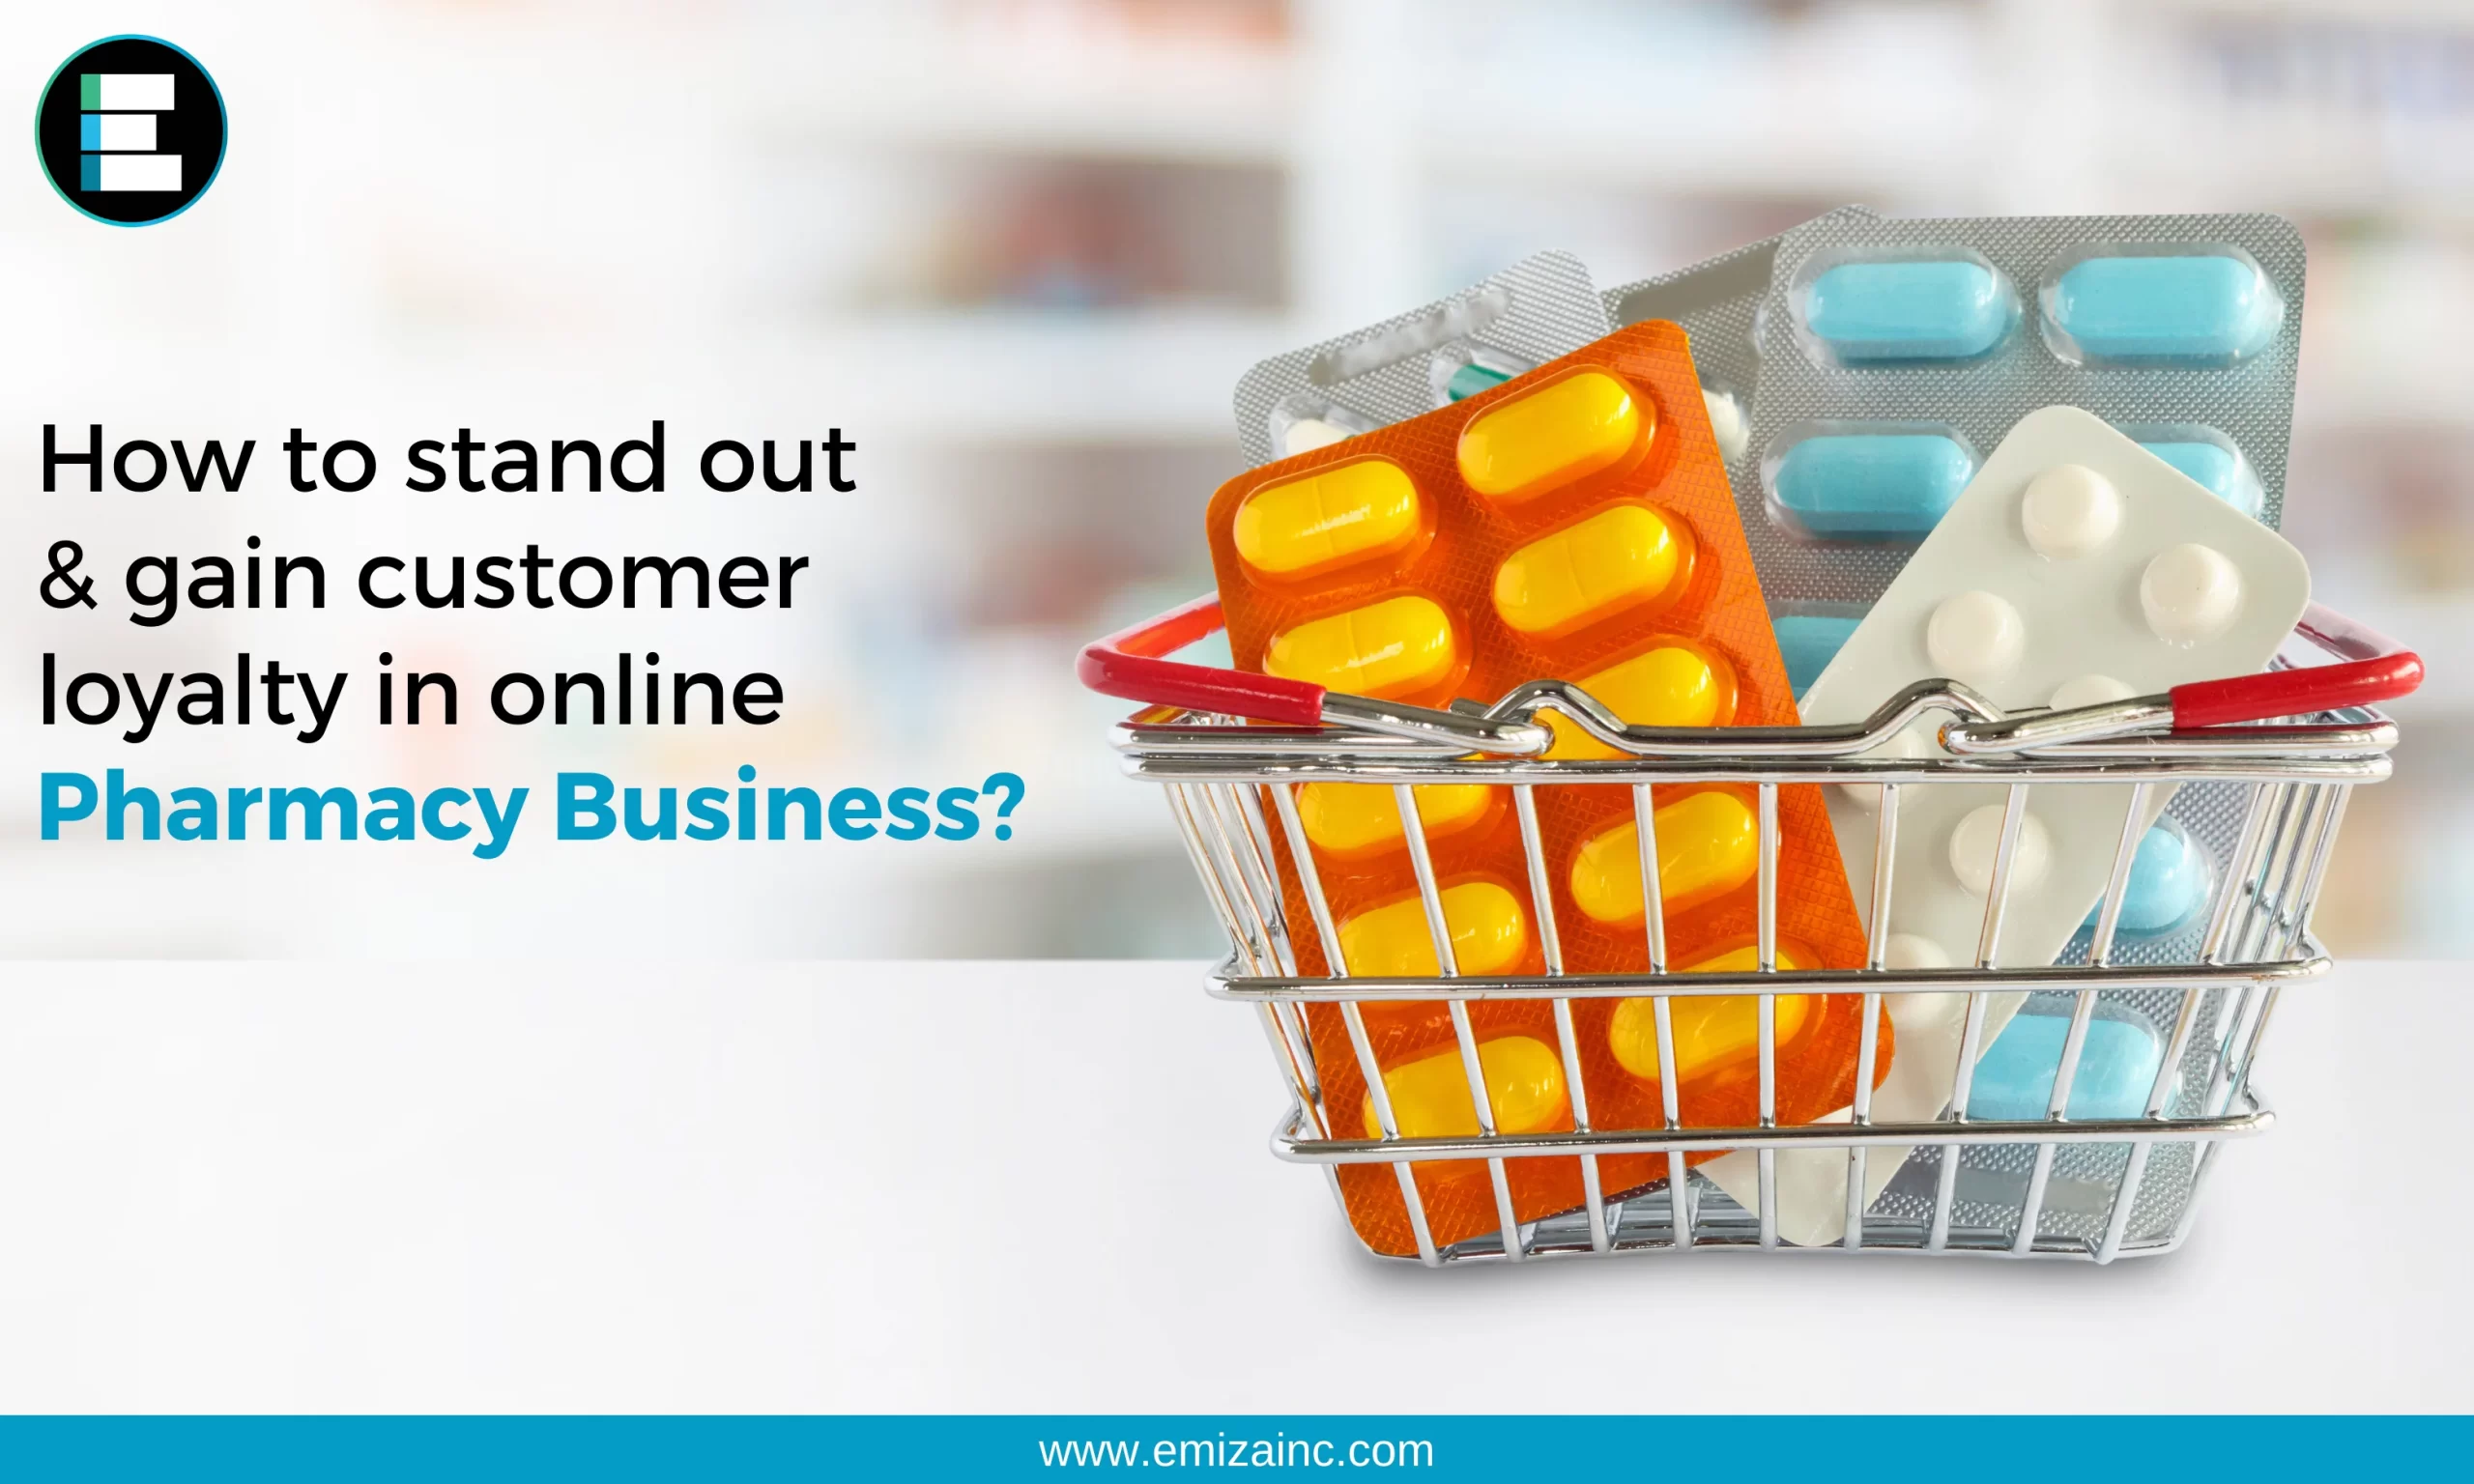 How to stand out and gain customer loyalty in the online pharmacy business